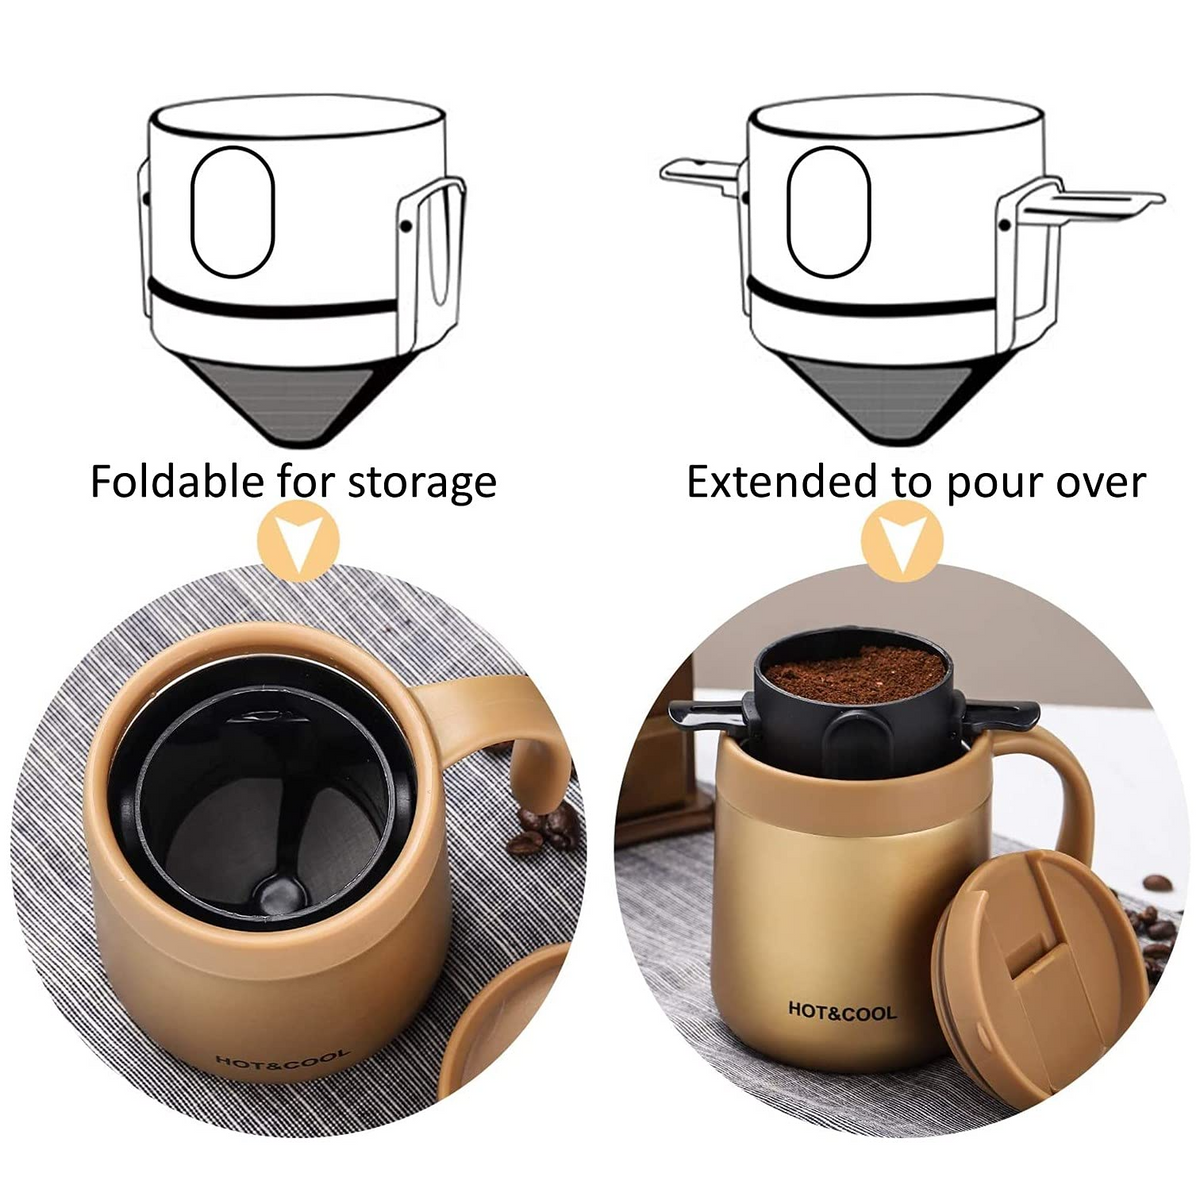 Verilux Filter Coffee Maker Double Mesh Pour Over Coffee Filter Food Grade Stainless Steel & Plastic Coffee Dripper 100% Paperless Maker Foldable to Fit Most Cup Keep Coffee Flavour Easy to Use and Clean - verilux